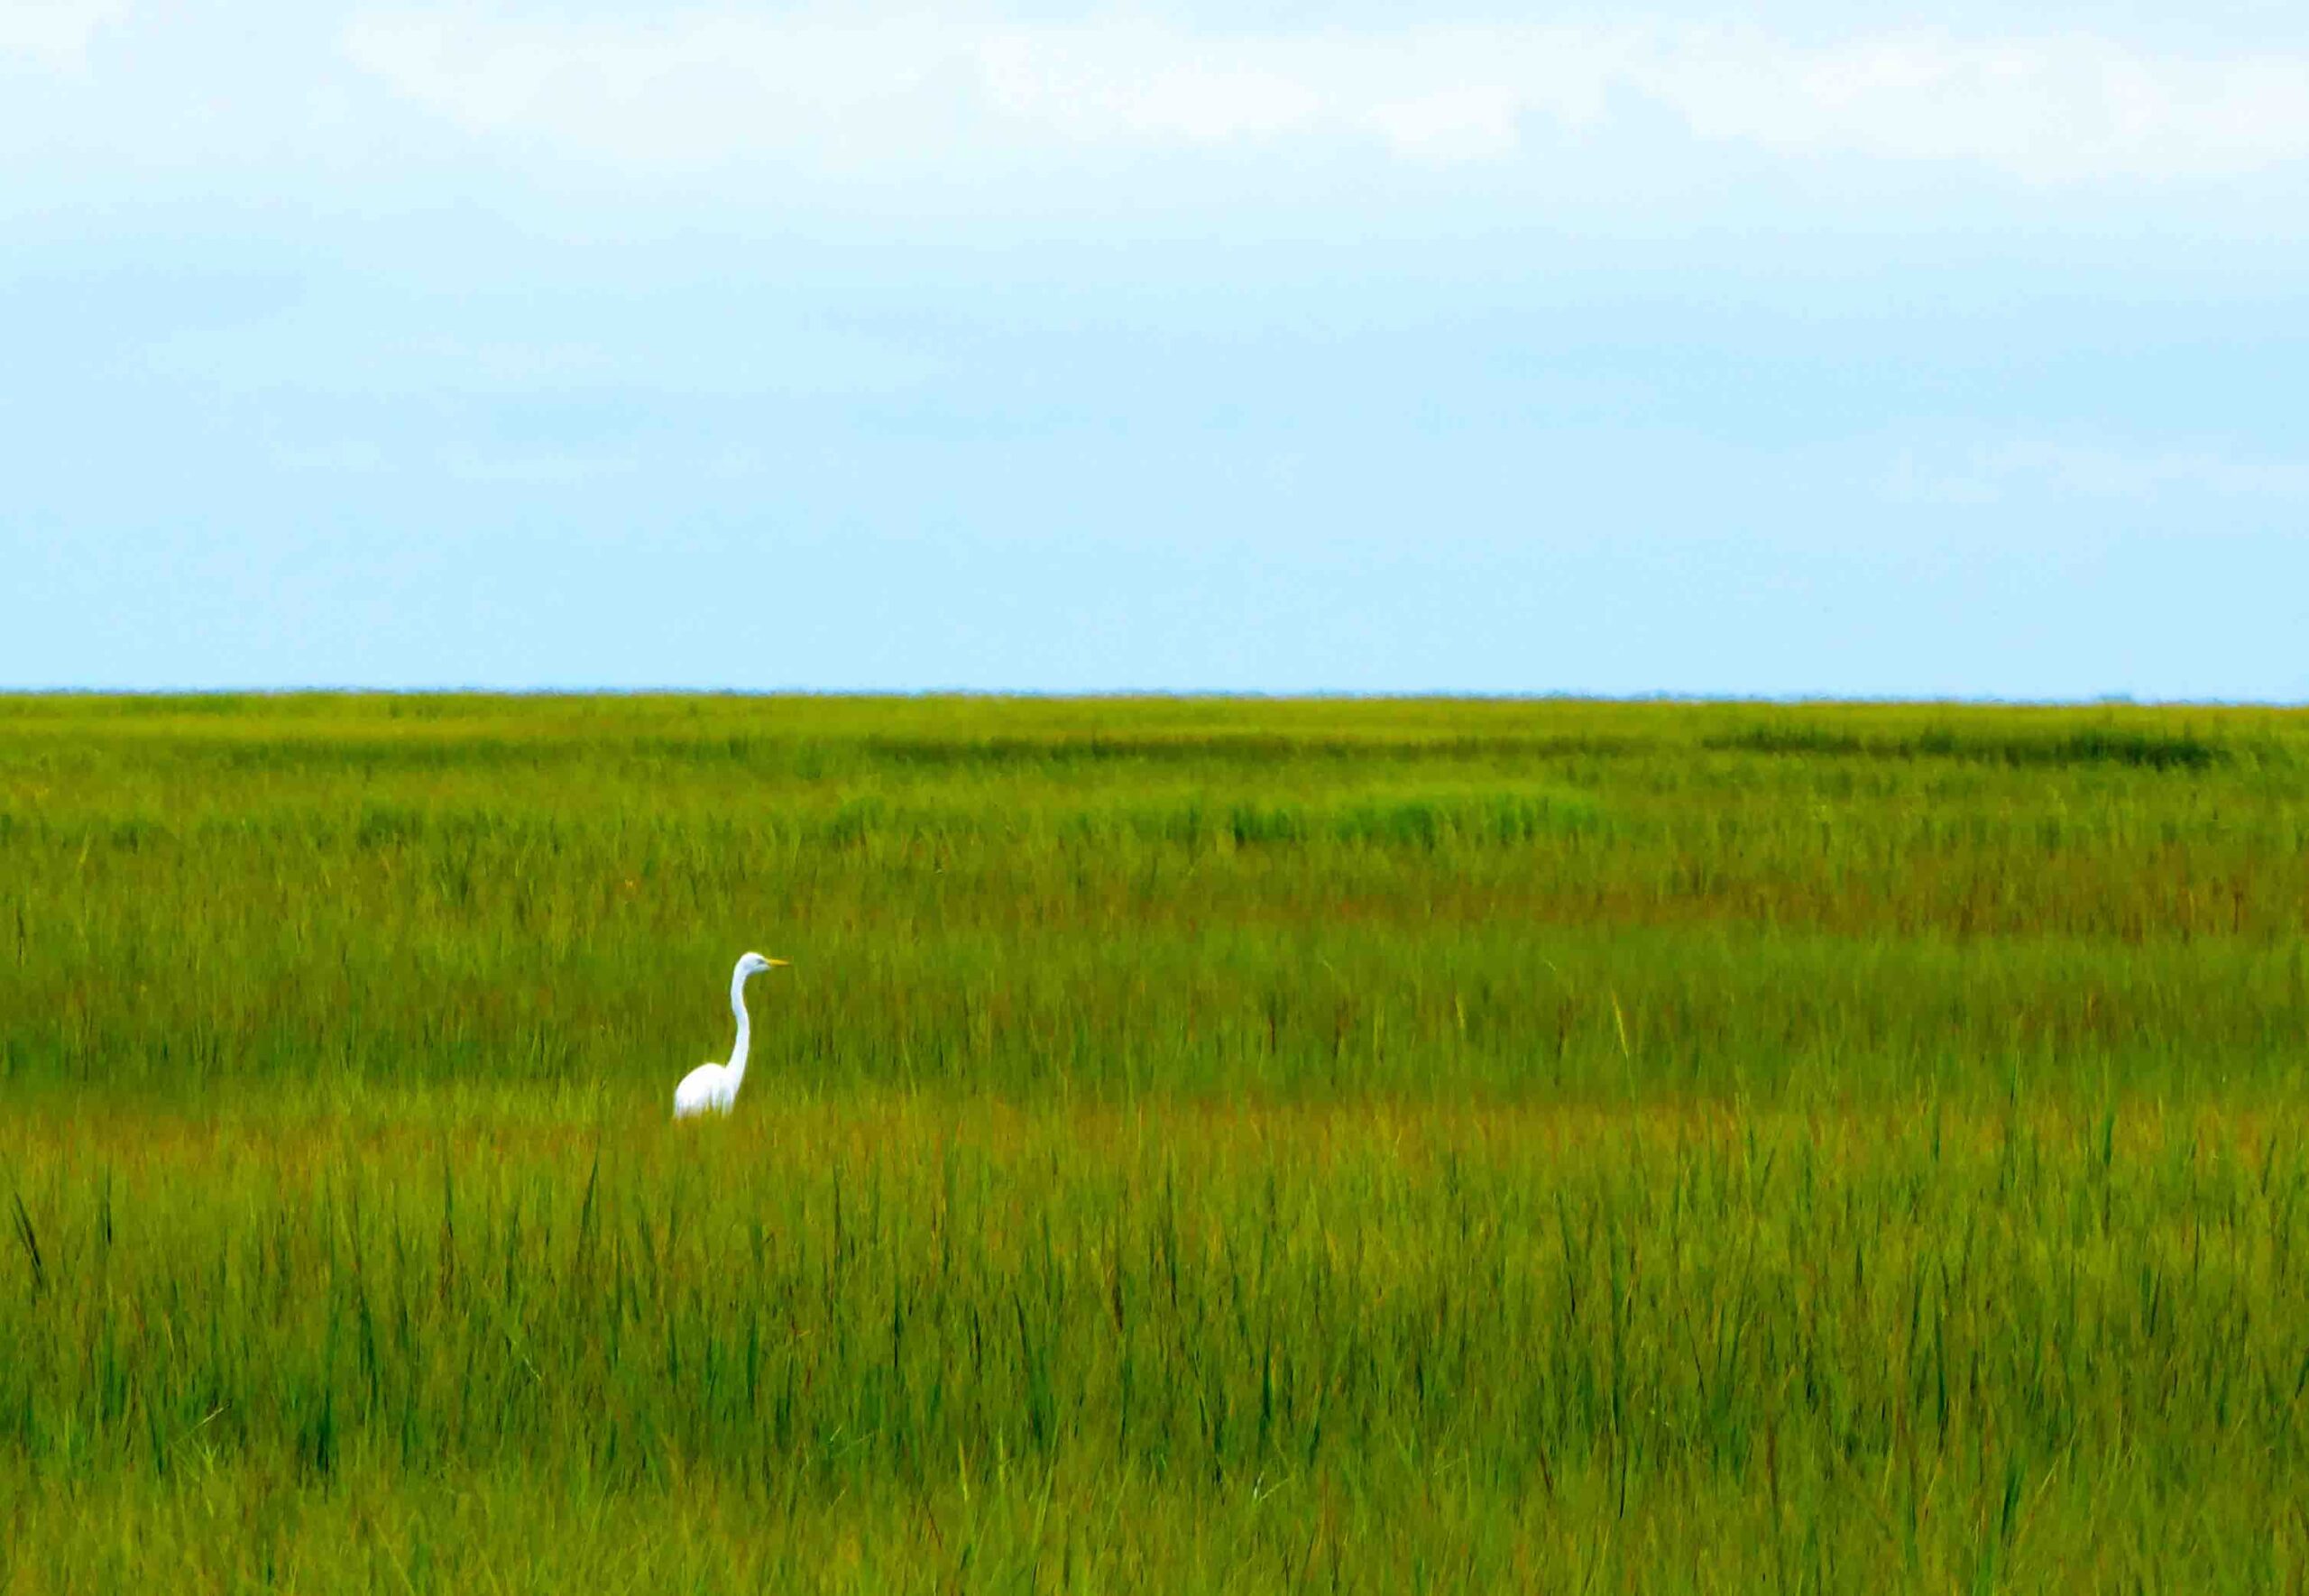 eastern shore scenery with great egret